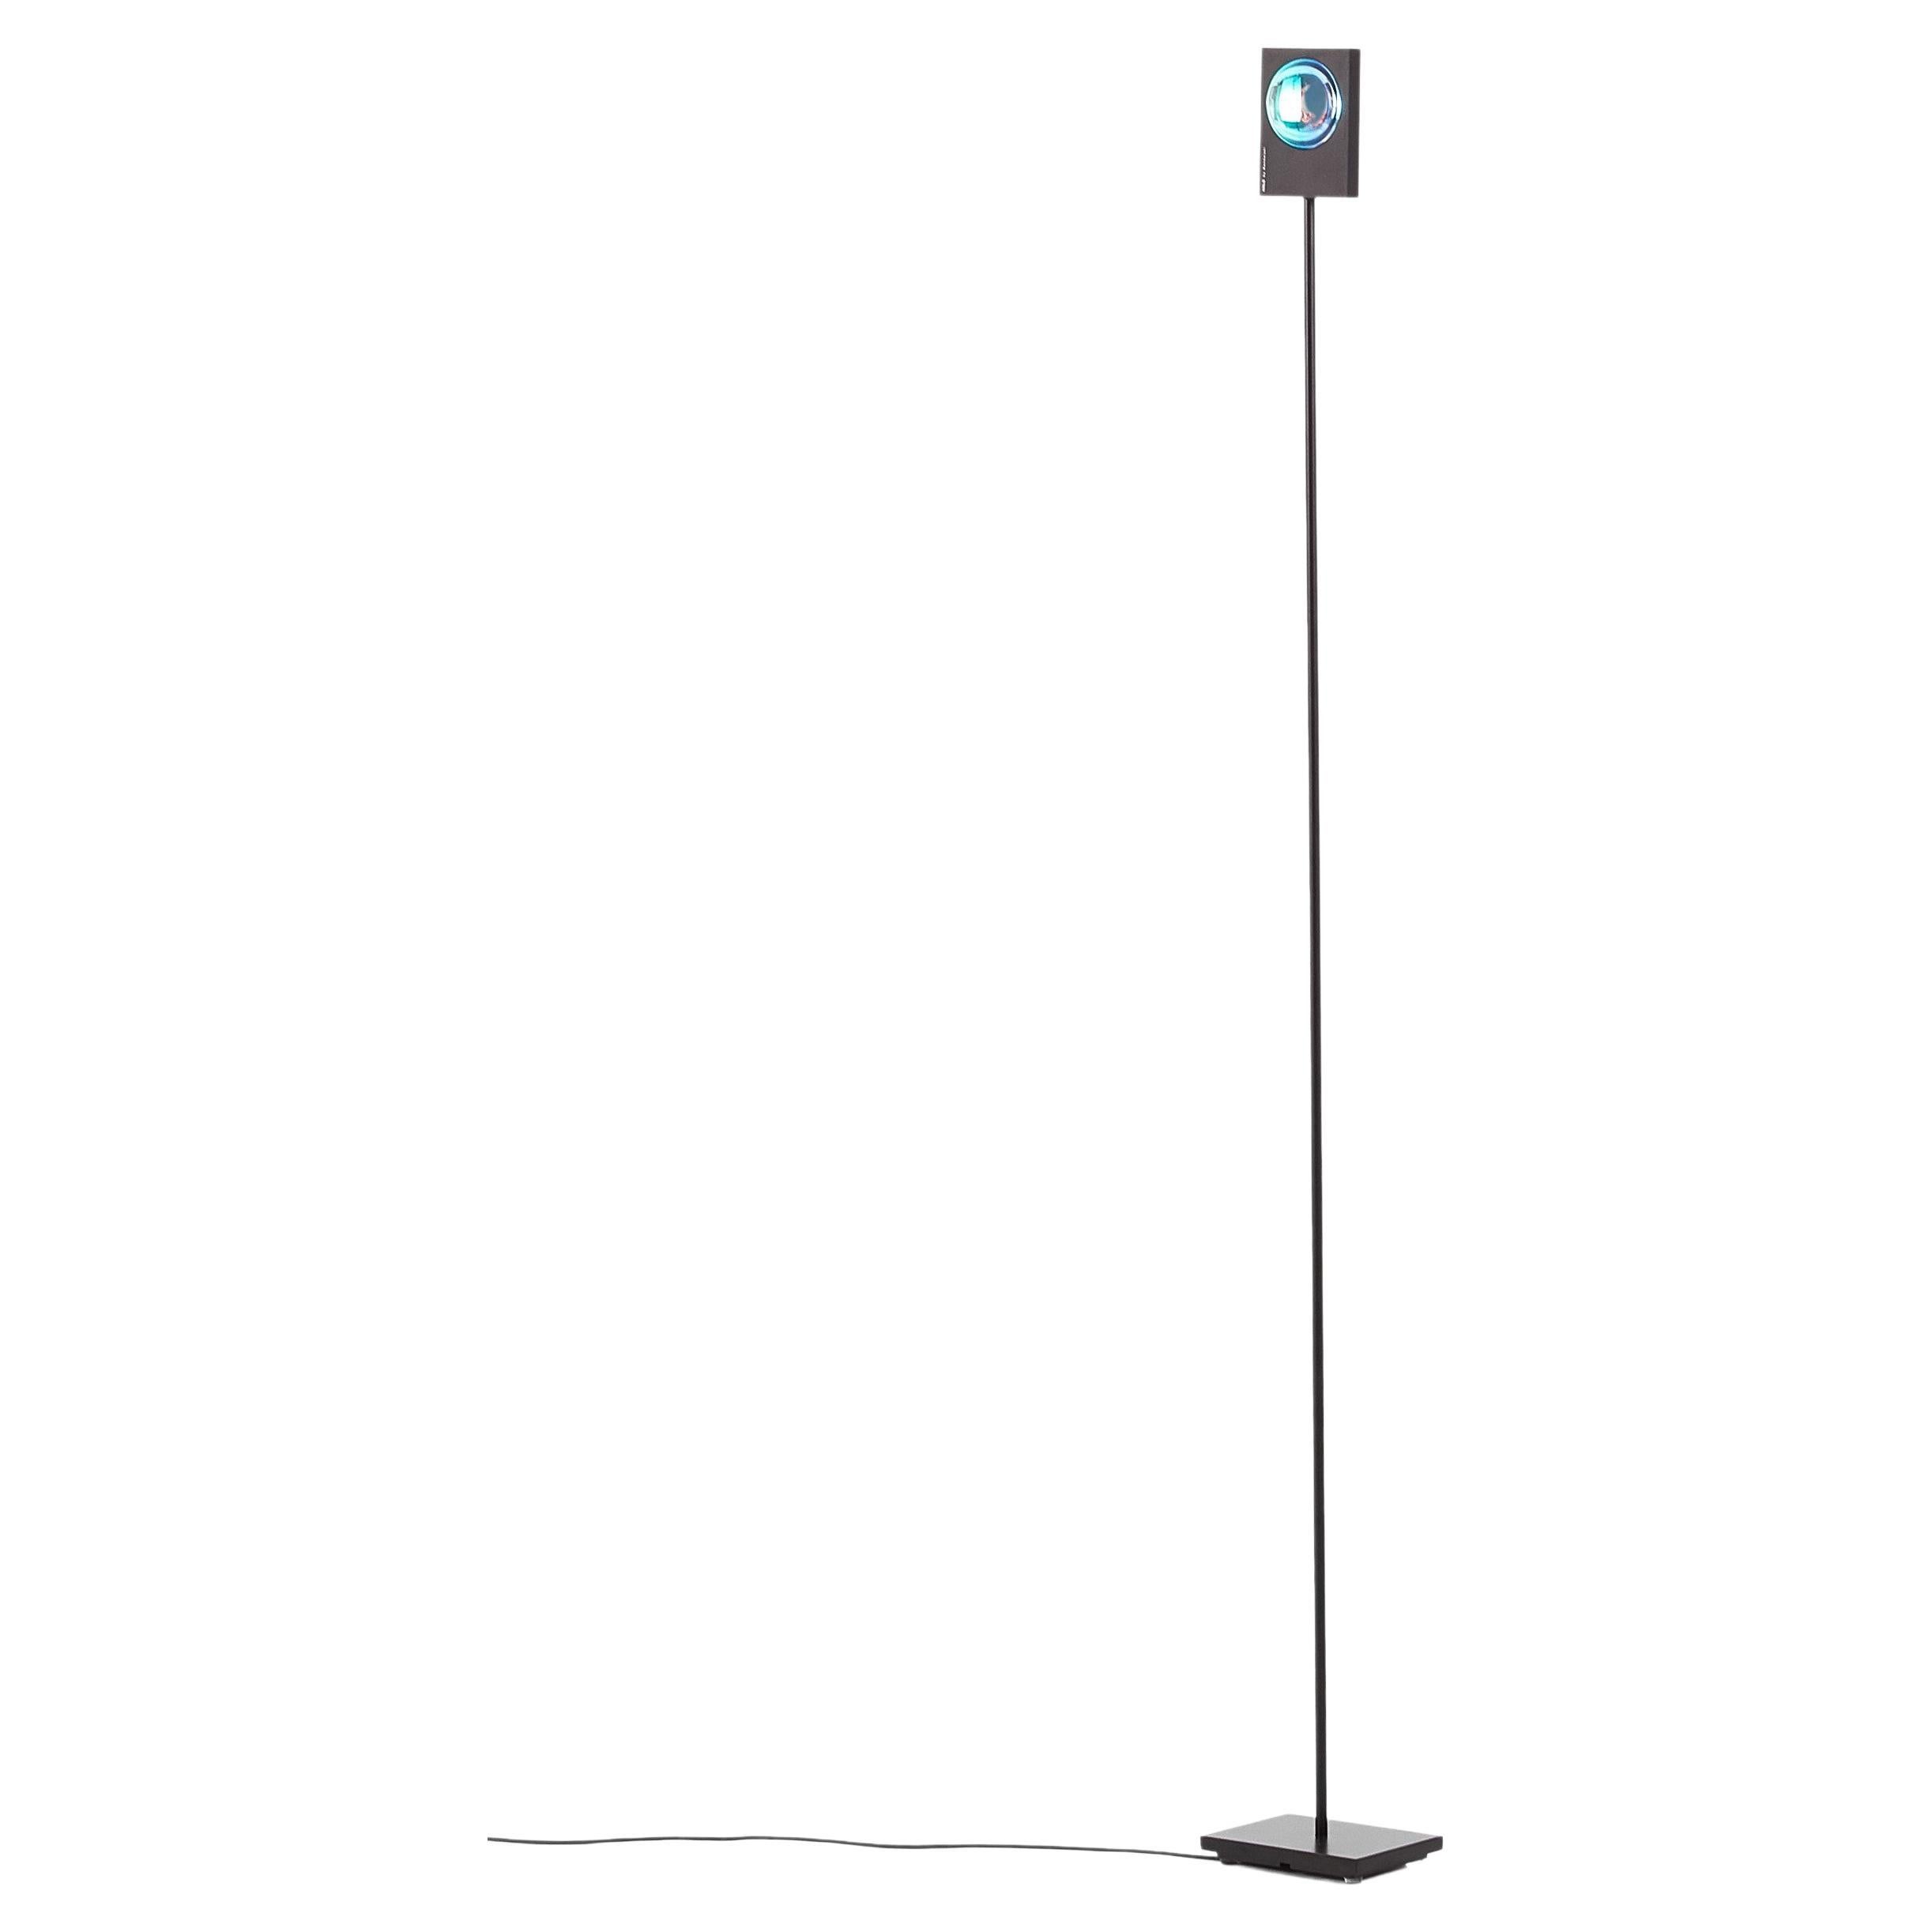 Deep Blue Halo One floor lamp by Mandalaki
Dimensions: D 10 x W 13 x H 120 cm
Materials: Aluminium, brass, iron, glass
Available in other light color.

Weight: 3 Kg
Input: 100-240V 50-60Hz
Output: 12V DC
LED Power: 4W
Lumen: ~ 500 lumen

All our